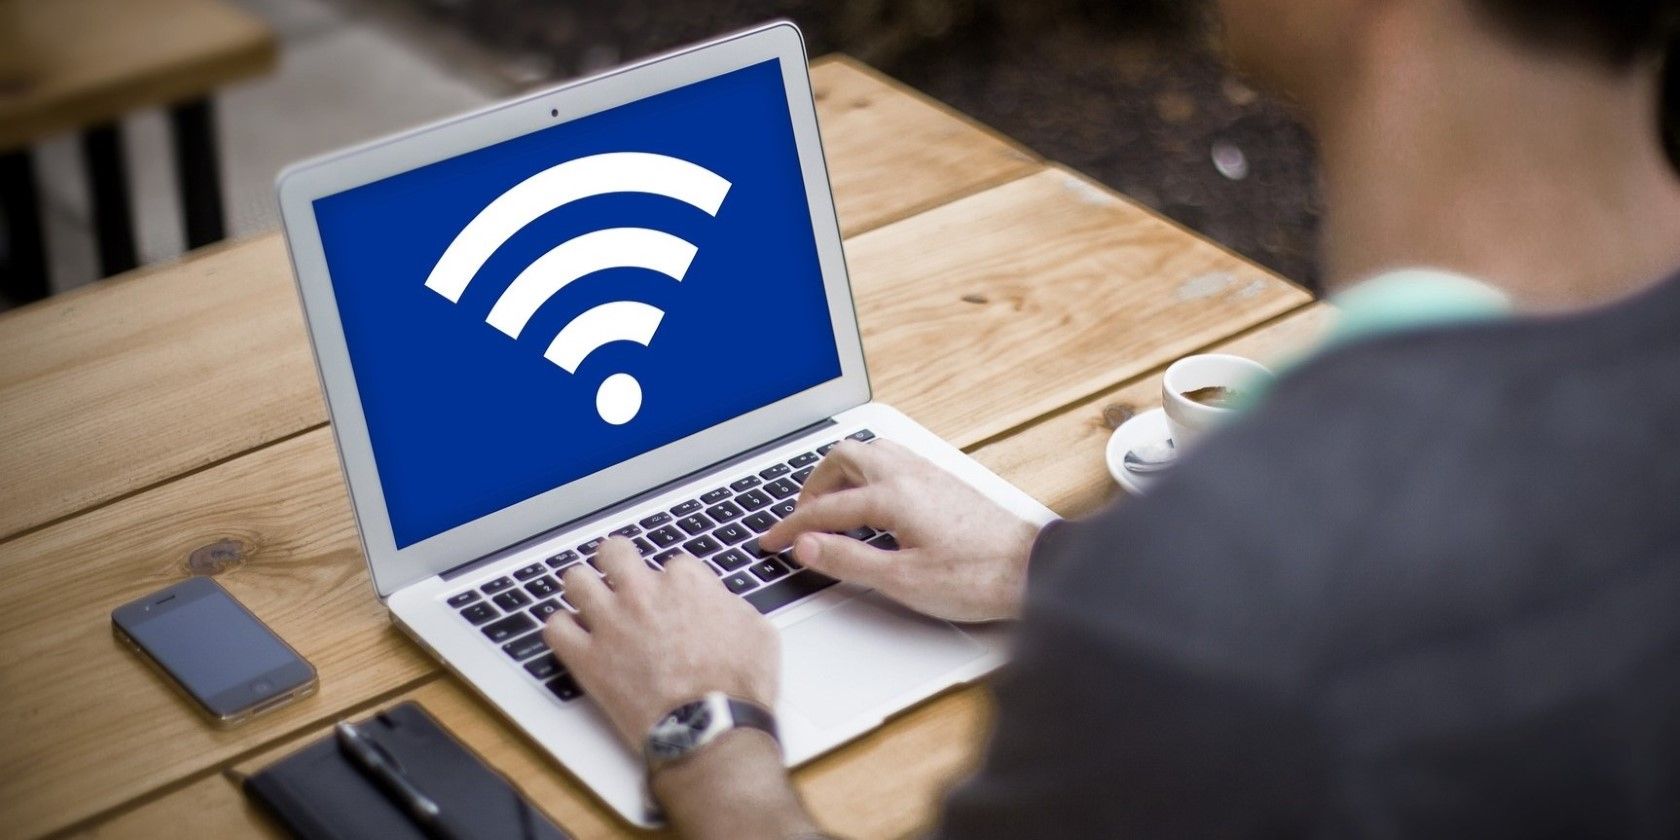 A man using a silver laptop with a Wi-Fi symbol on it